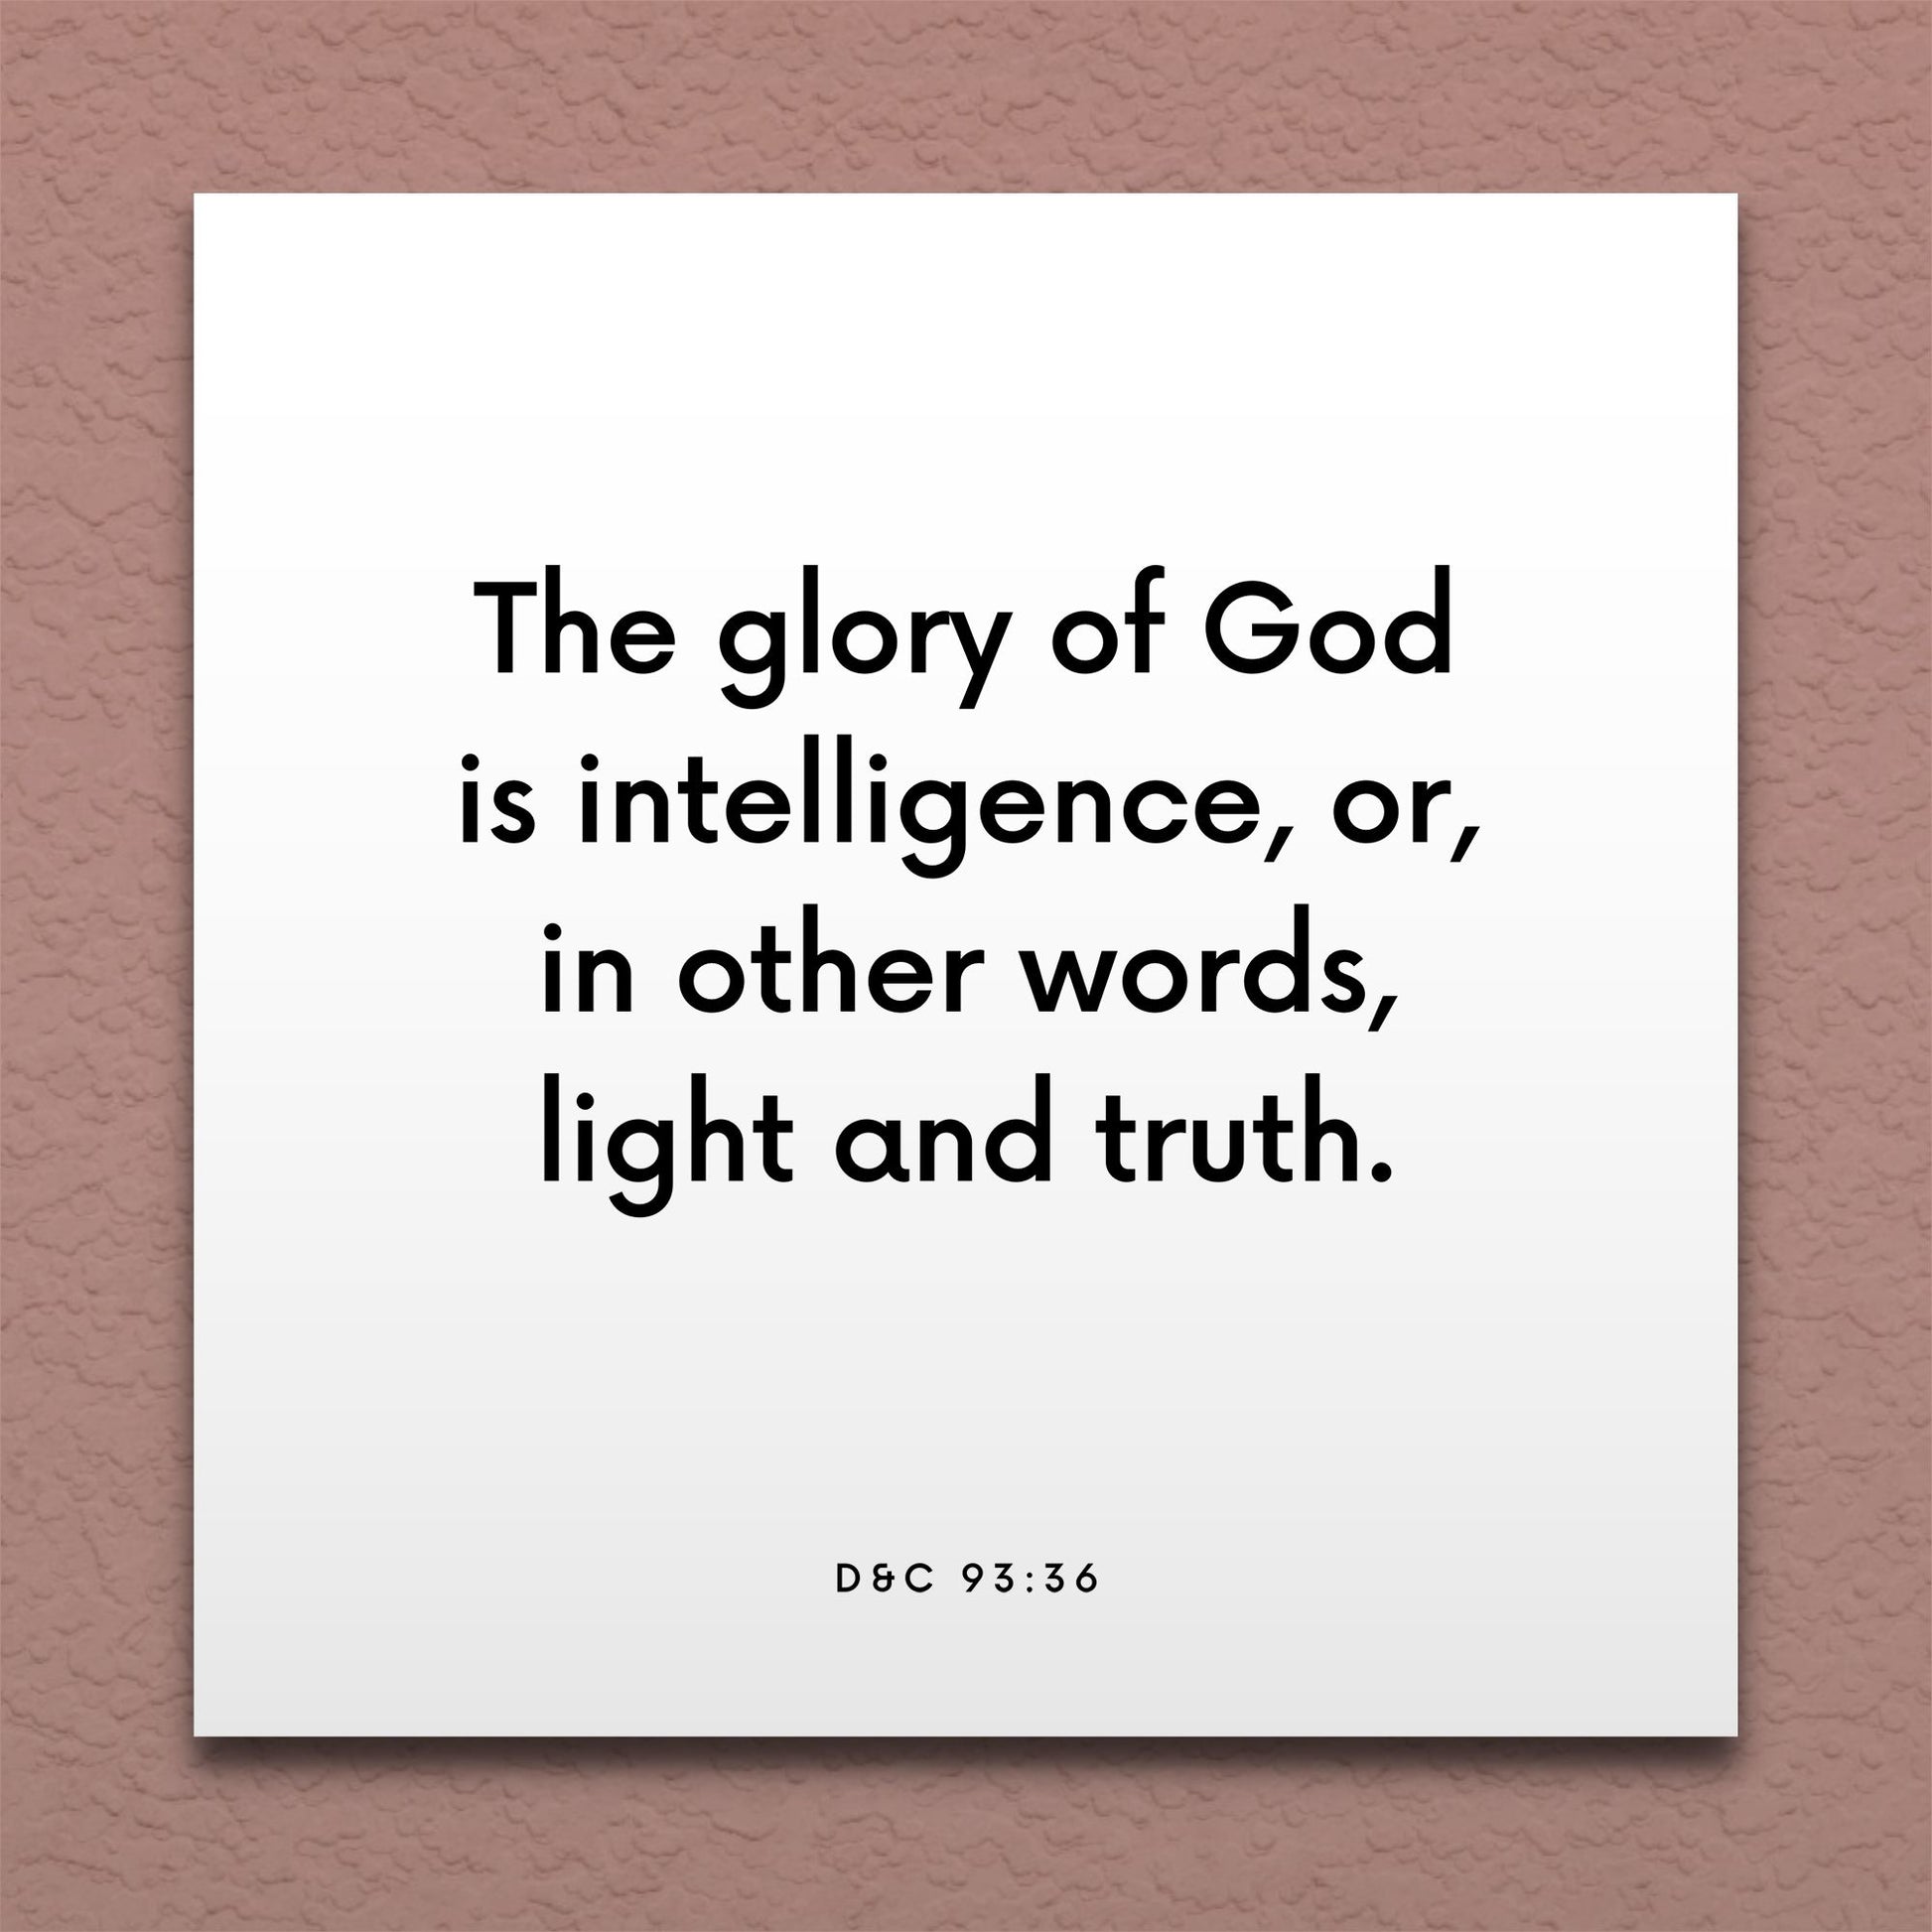 Wall-mounted scripture tile for D&C 93:36 - "The glory of God is intelligence"